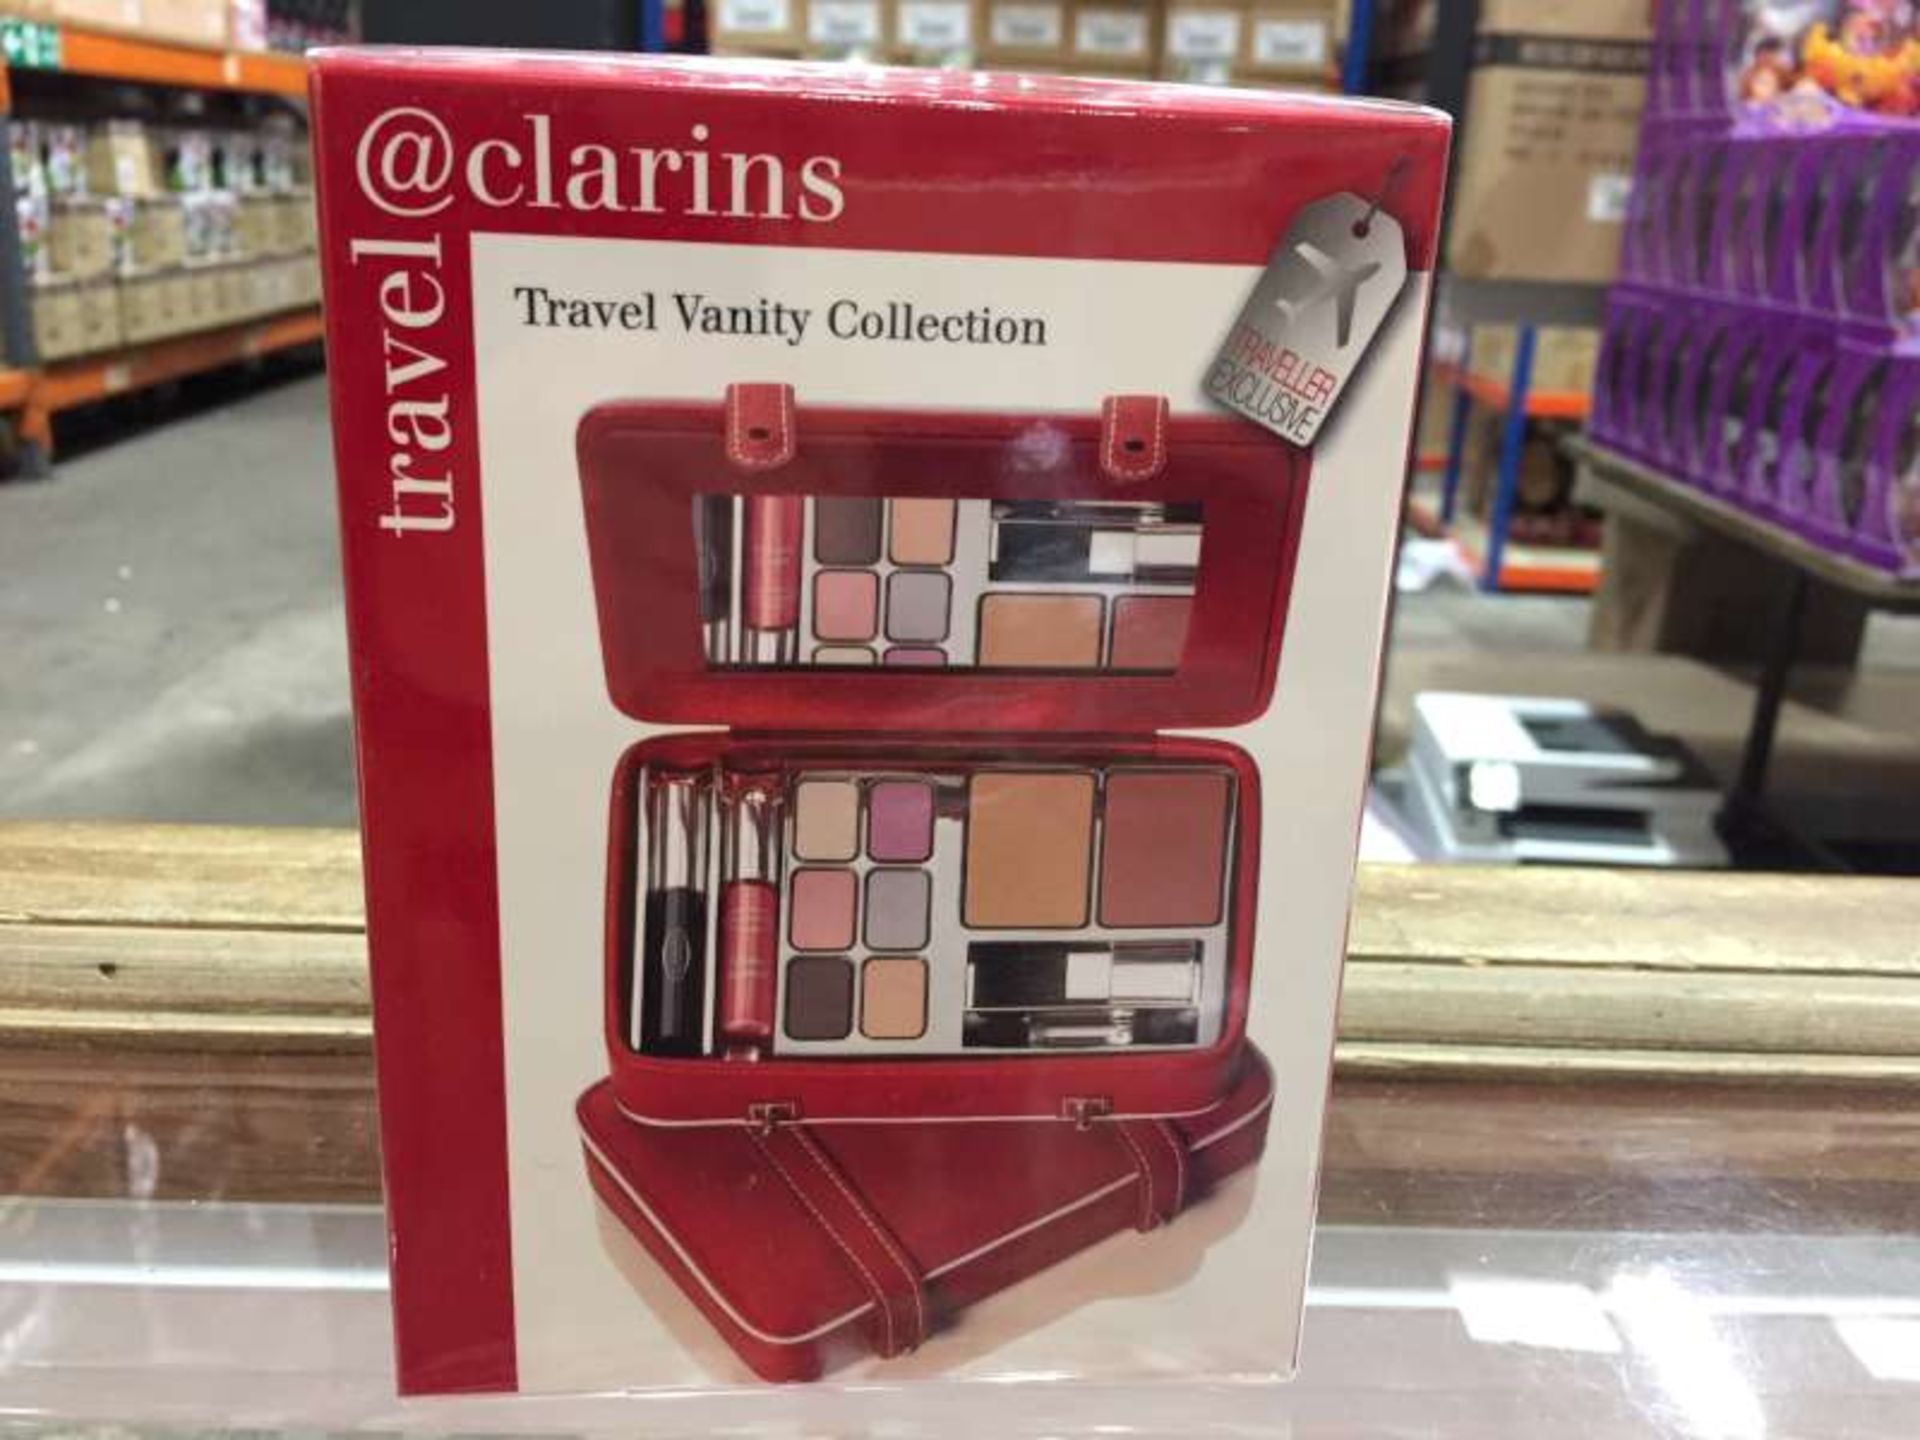 10 CLARINS TRAVEL VANITY COLLECTION MAKEUP PALETTE